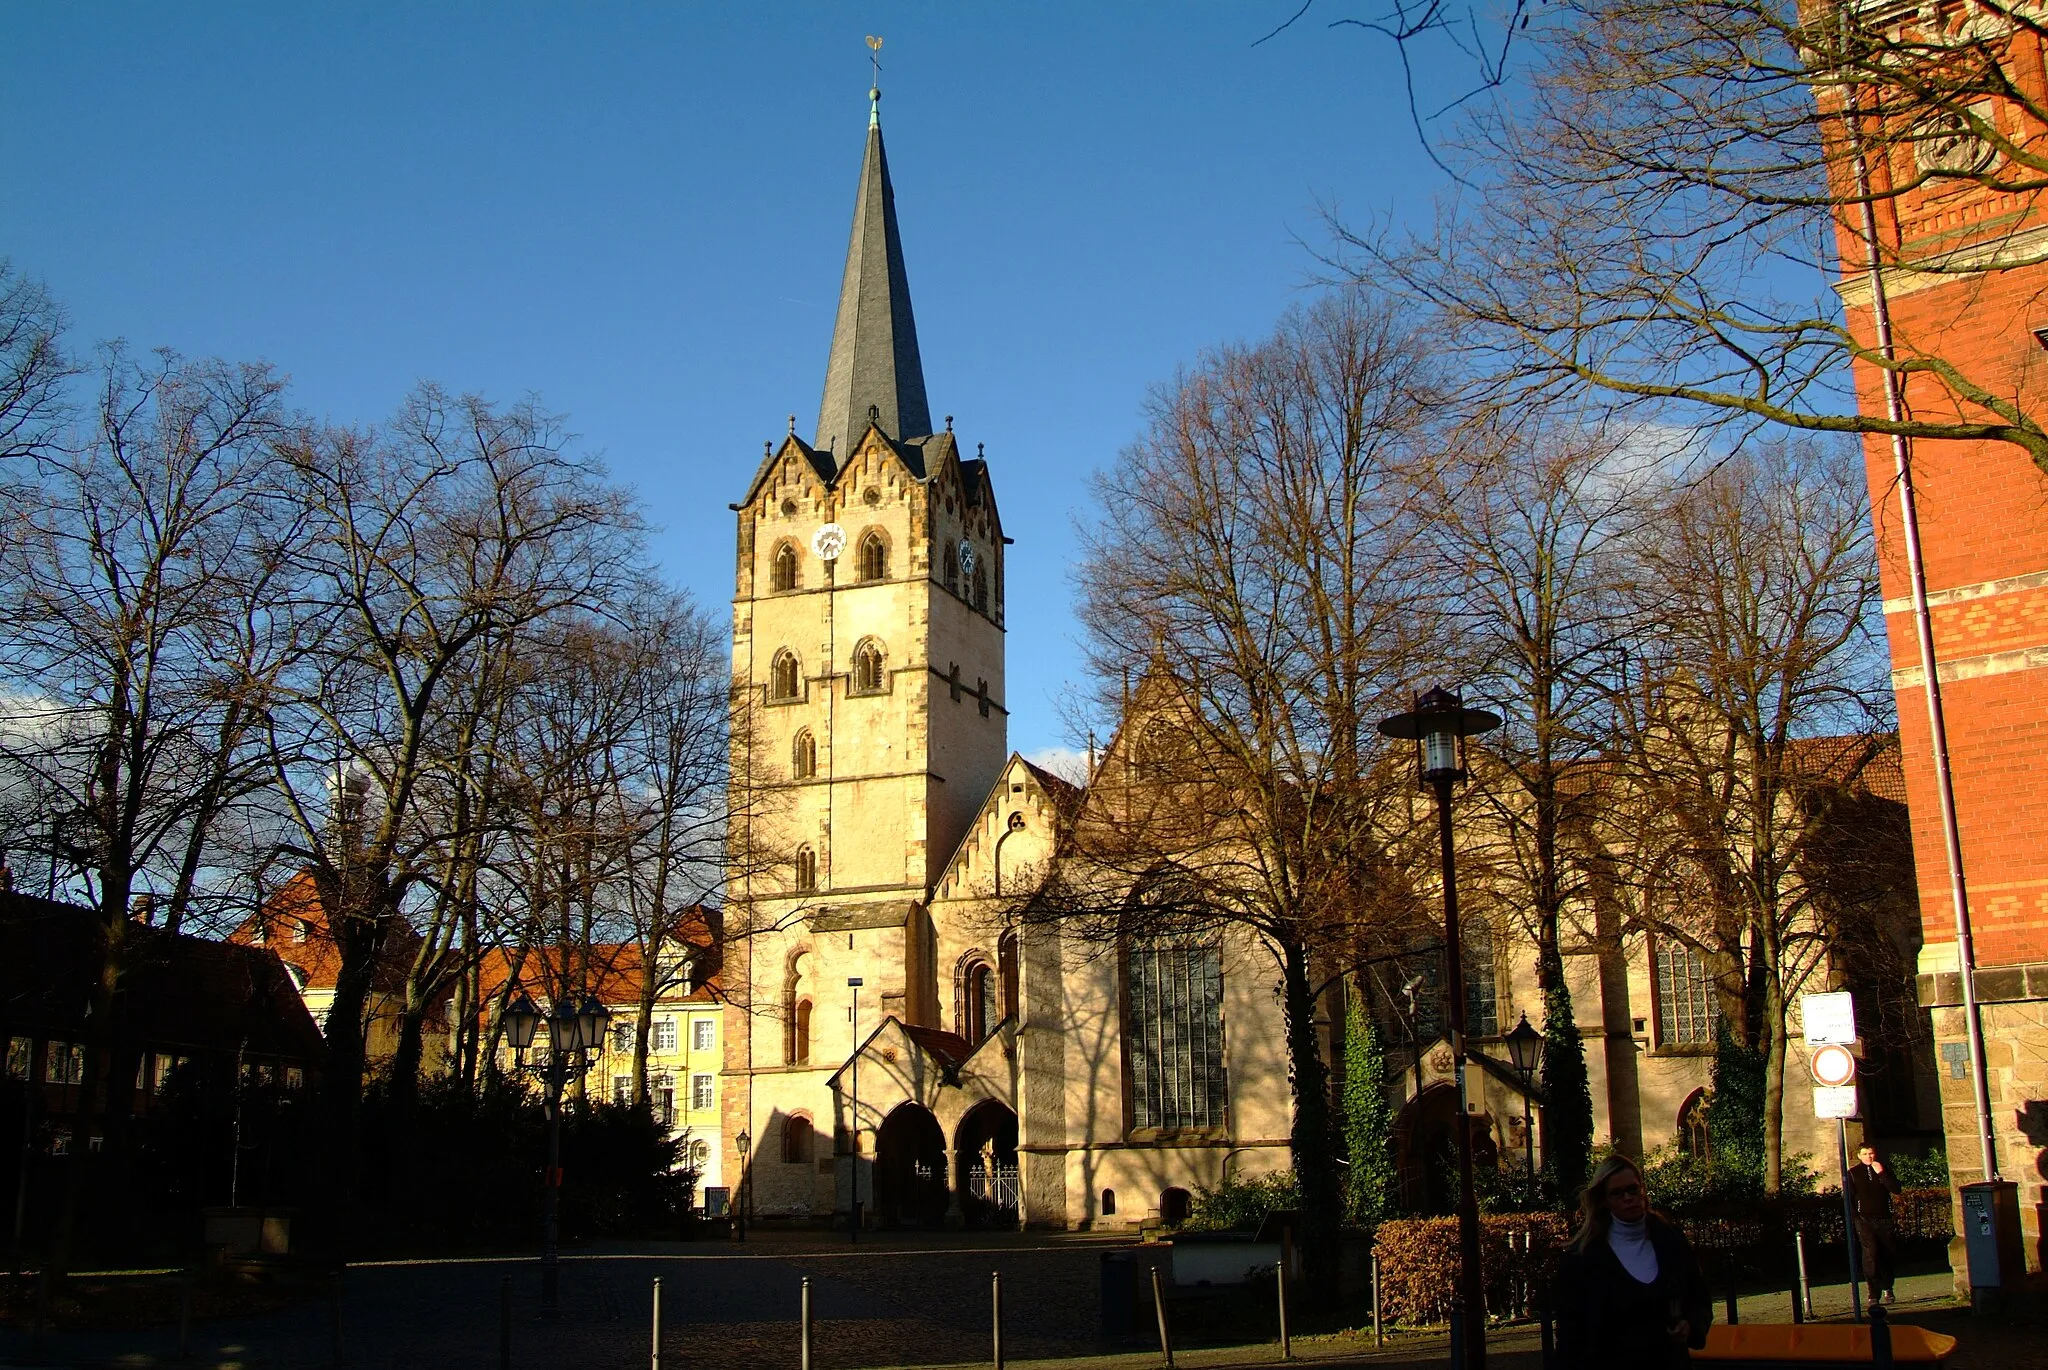 Photo showing: The Muensterkirche in in town of Herford, District of Herford, North Rhine-Westphalia, Germany. During the middleages it was a famous monastery for the education of upperclass daughters. The photo shows the south side of the building.